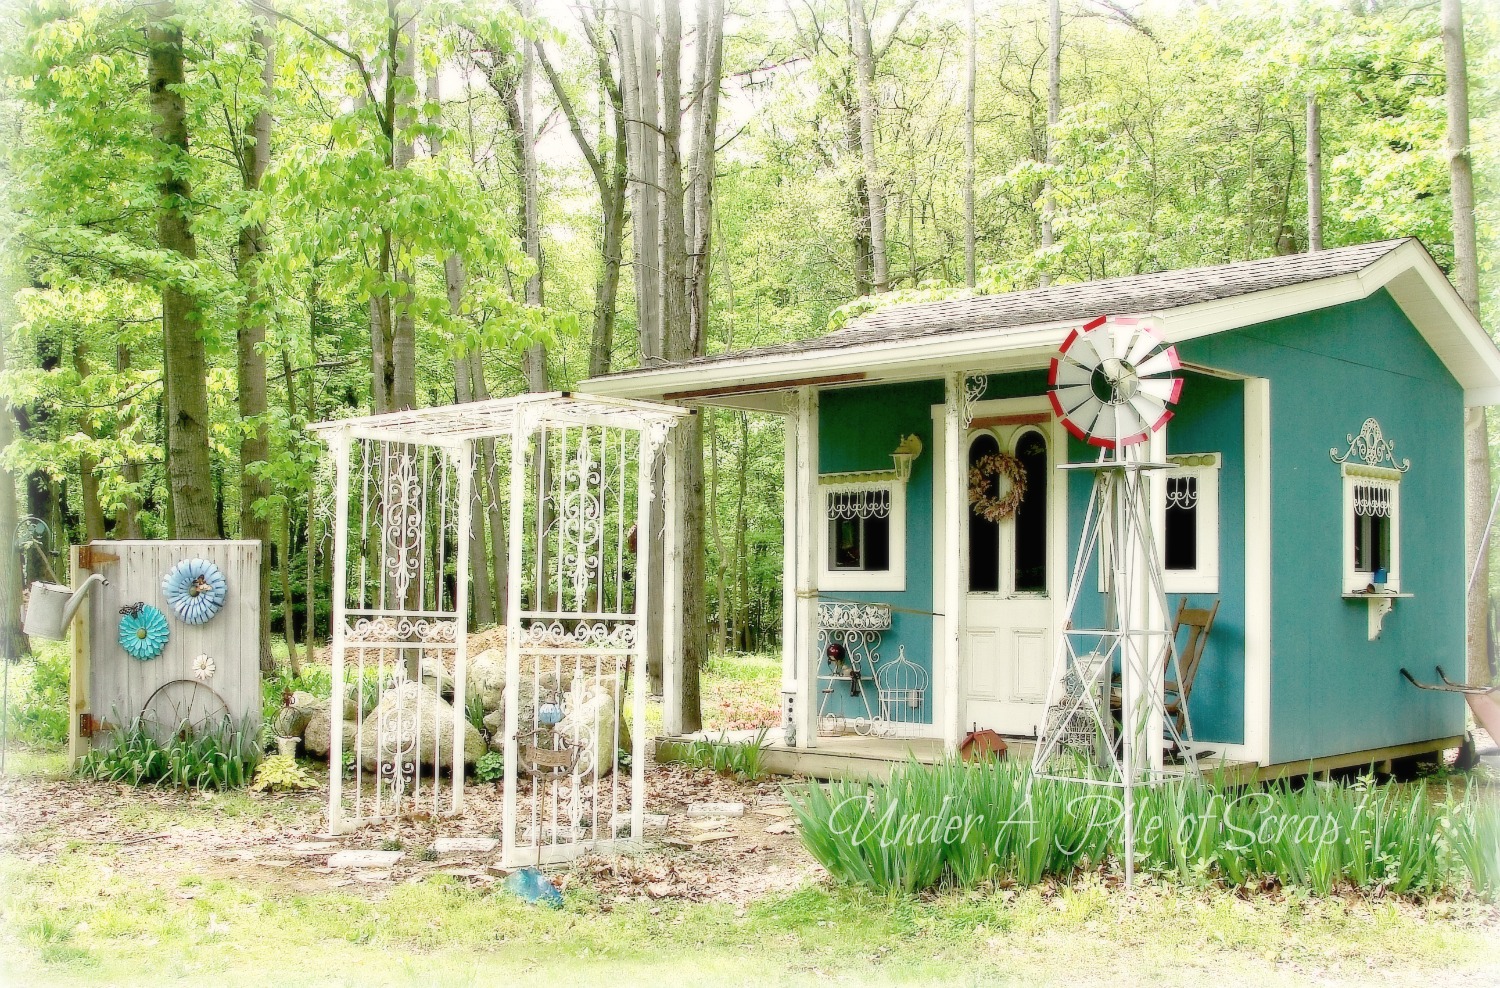 Under A Pile of Scrap!: My Little Shack Back in the Woods